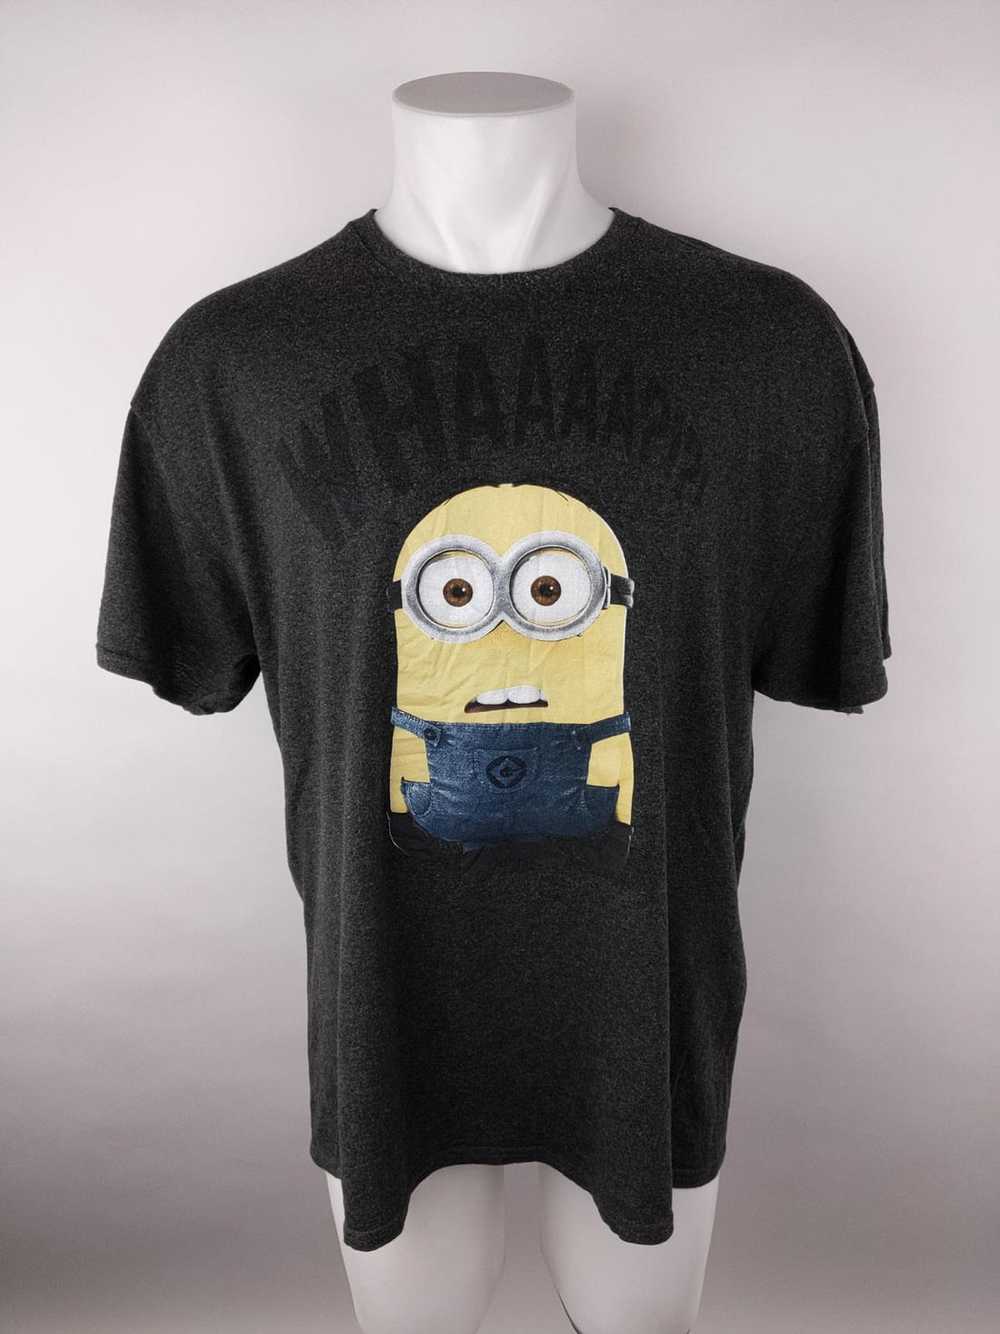 Despicable Me Minion Made Graphic Tee Shirt - Gem